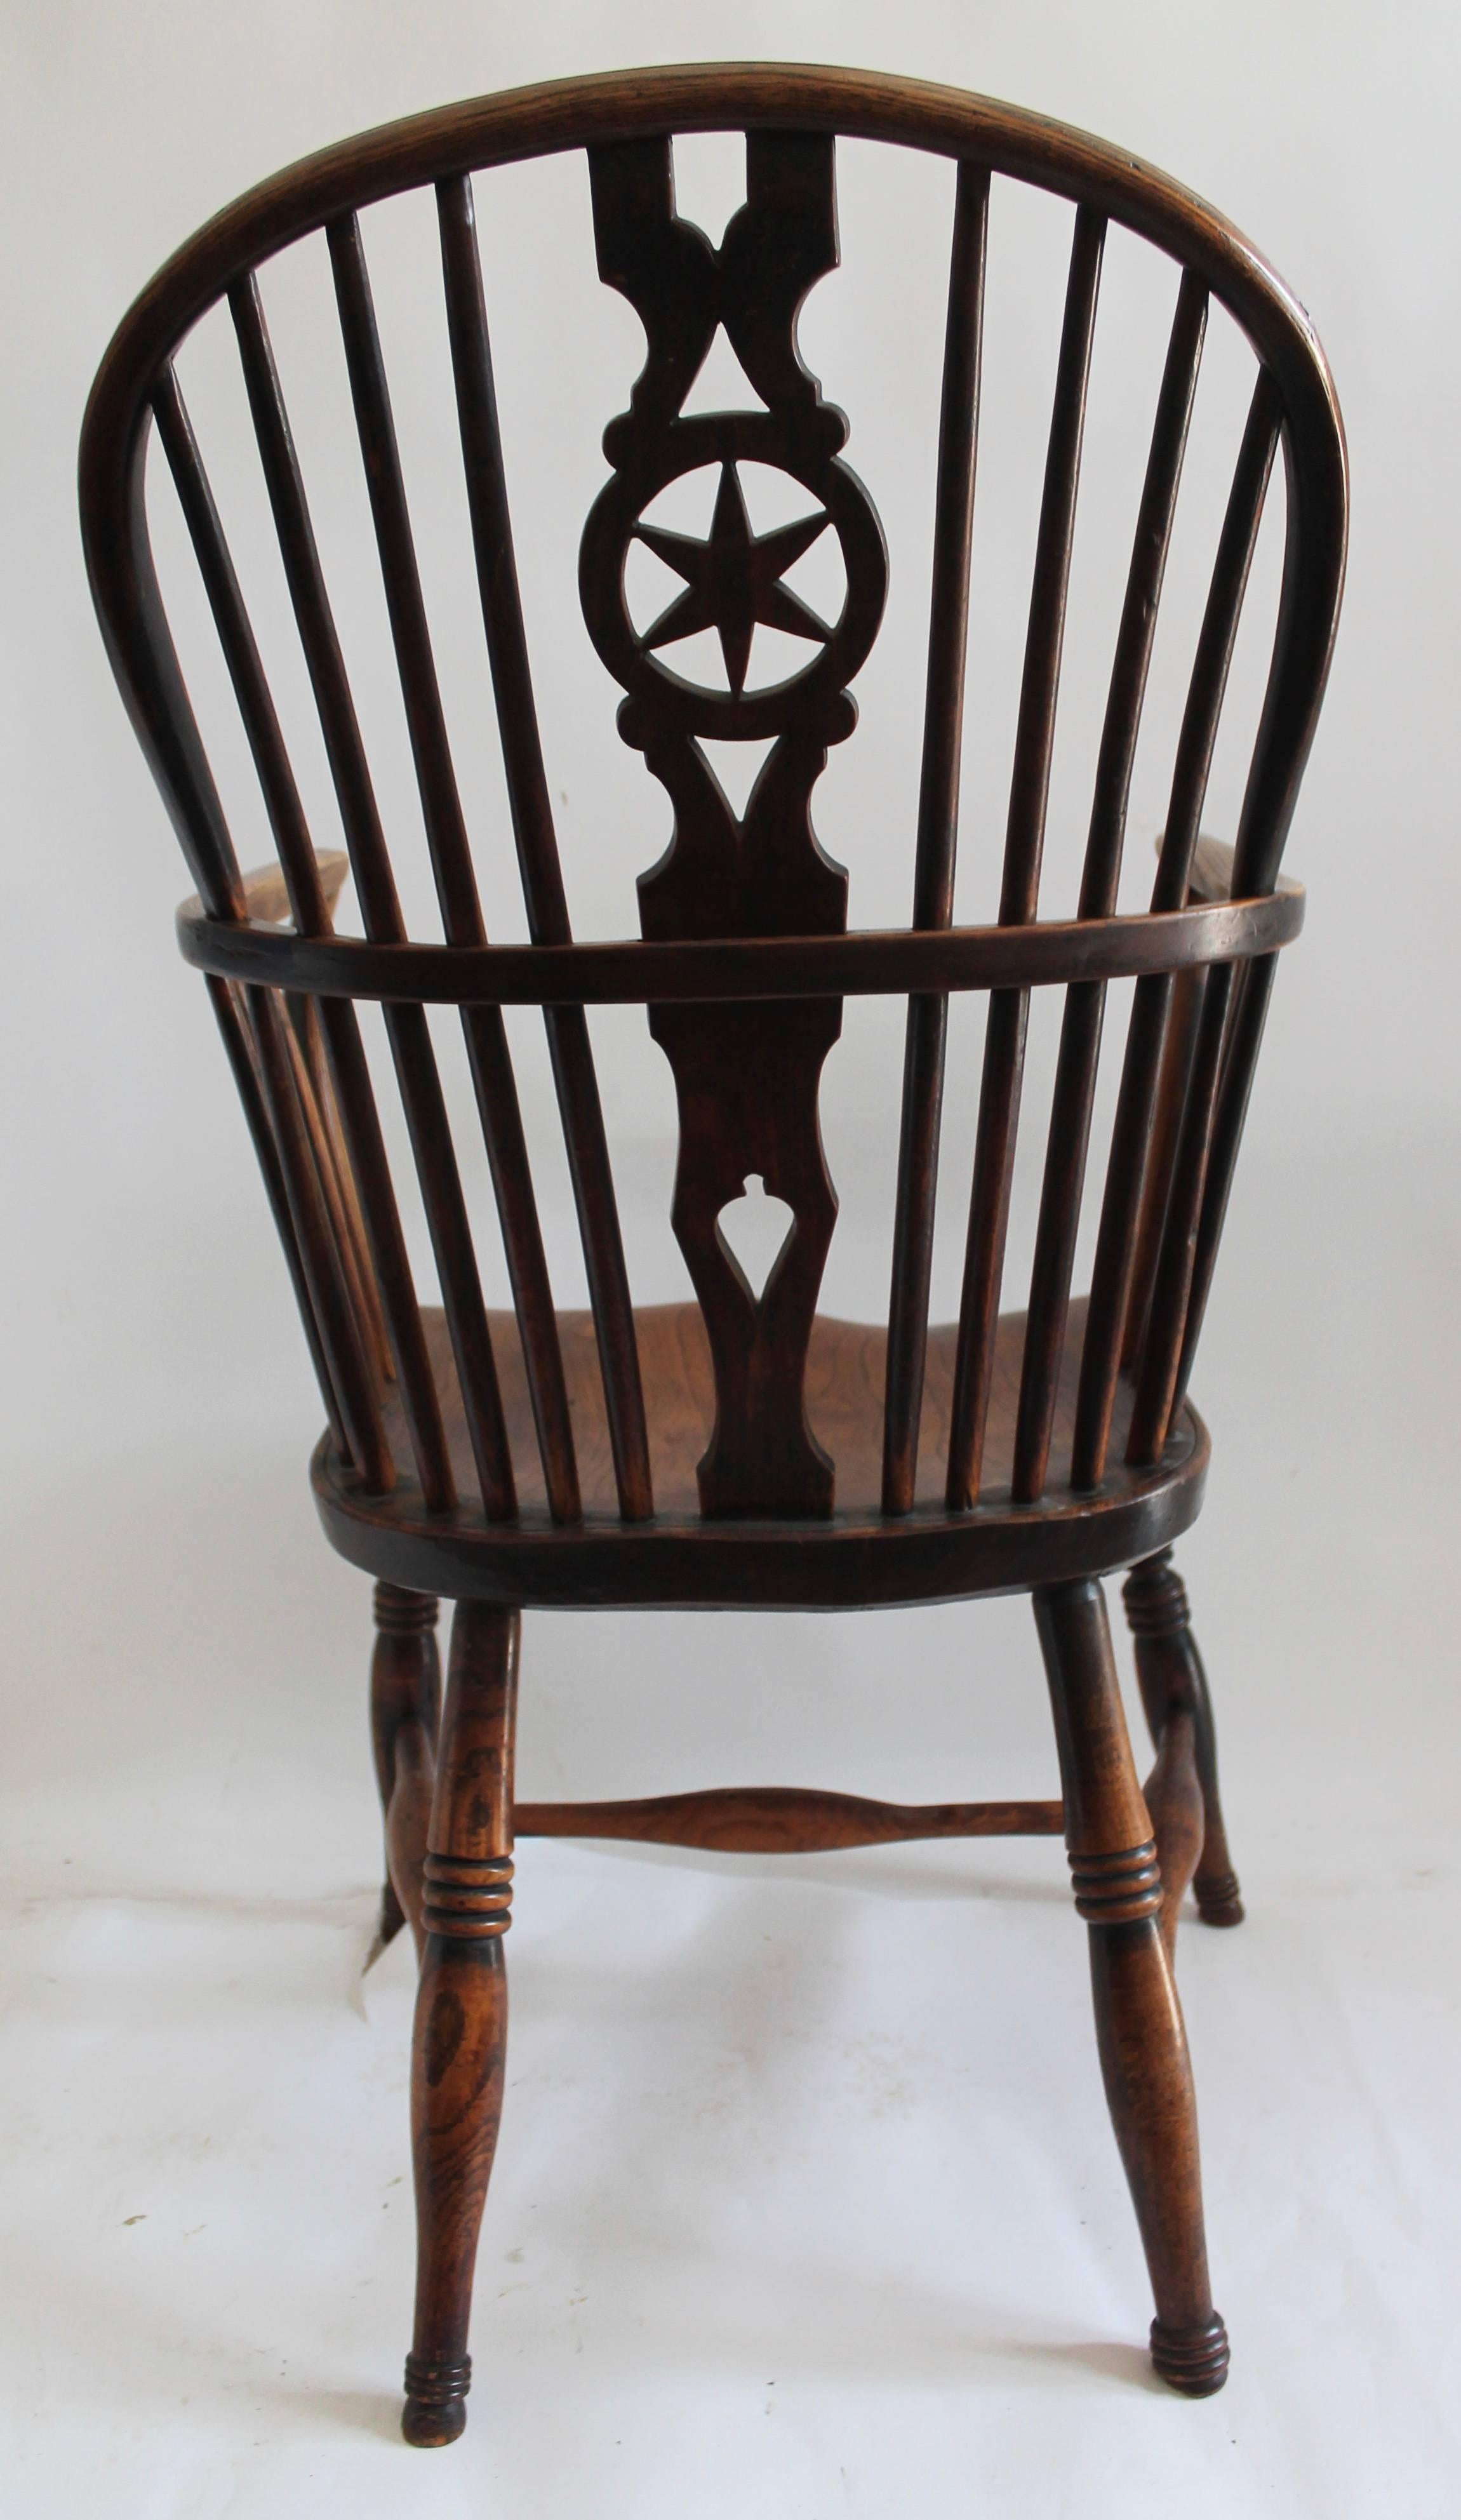 Hand-Crafted Early 19th Century English Windsor Chair with Star Back Splash